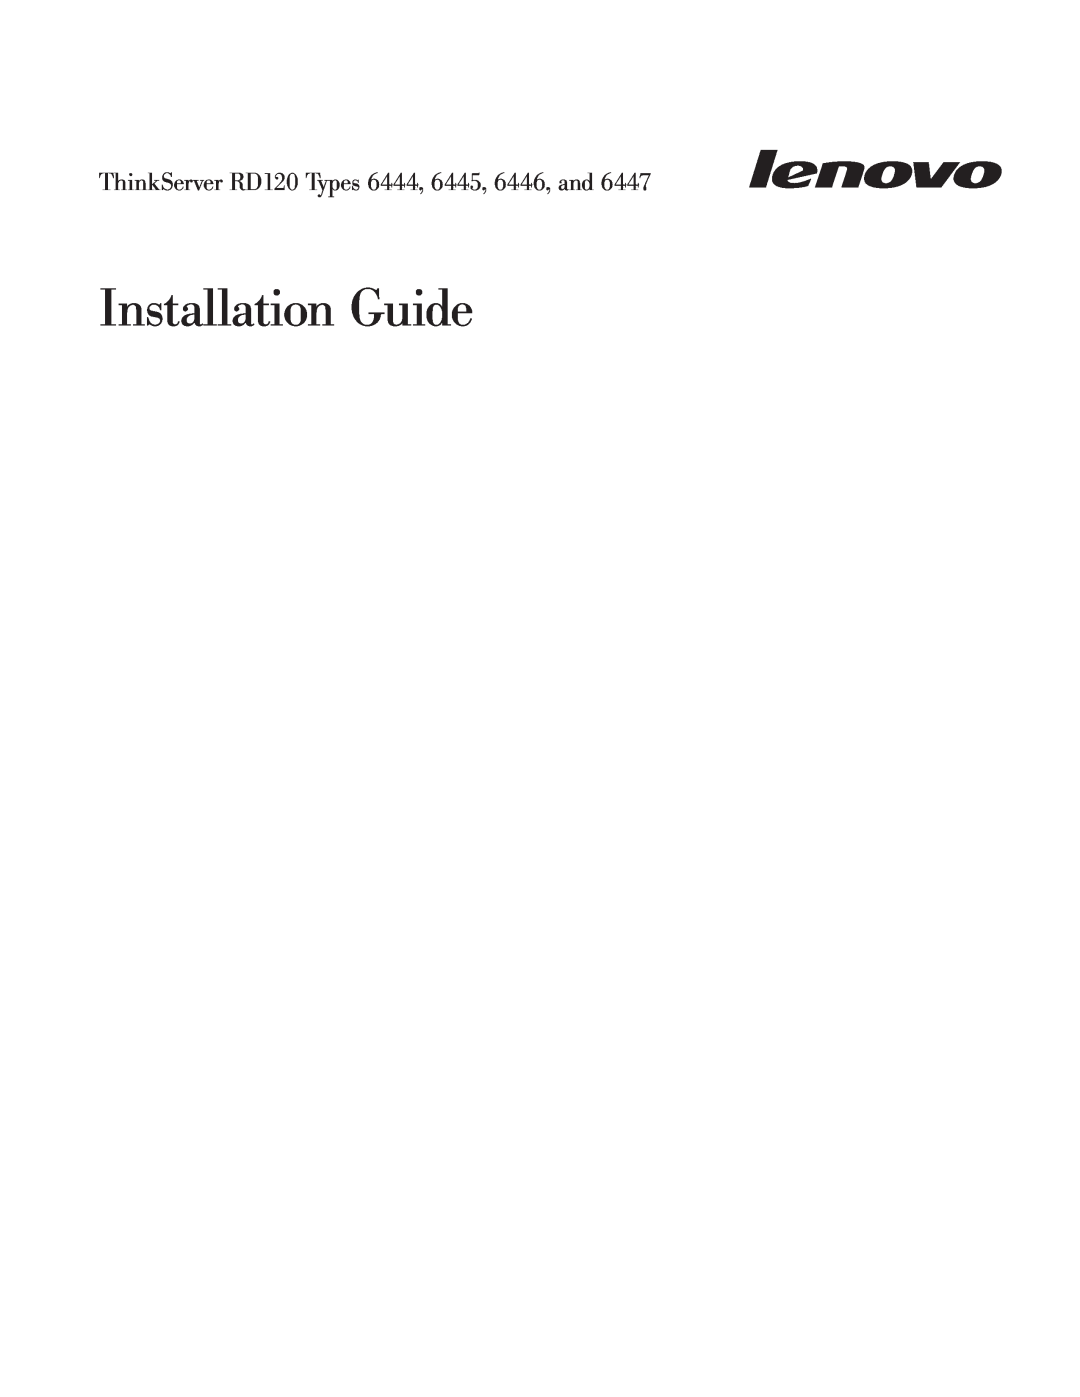 Lenovo 6447 manual Installation Guide, ThinkServer RD120 Types 6444, 6445, 6446, and 